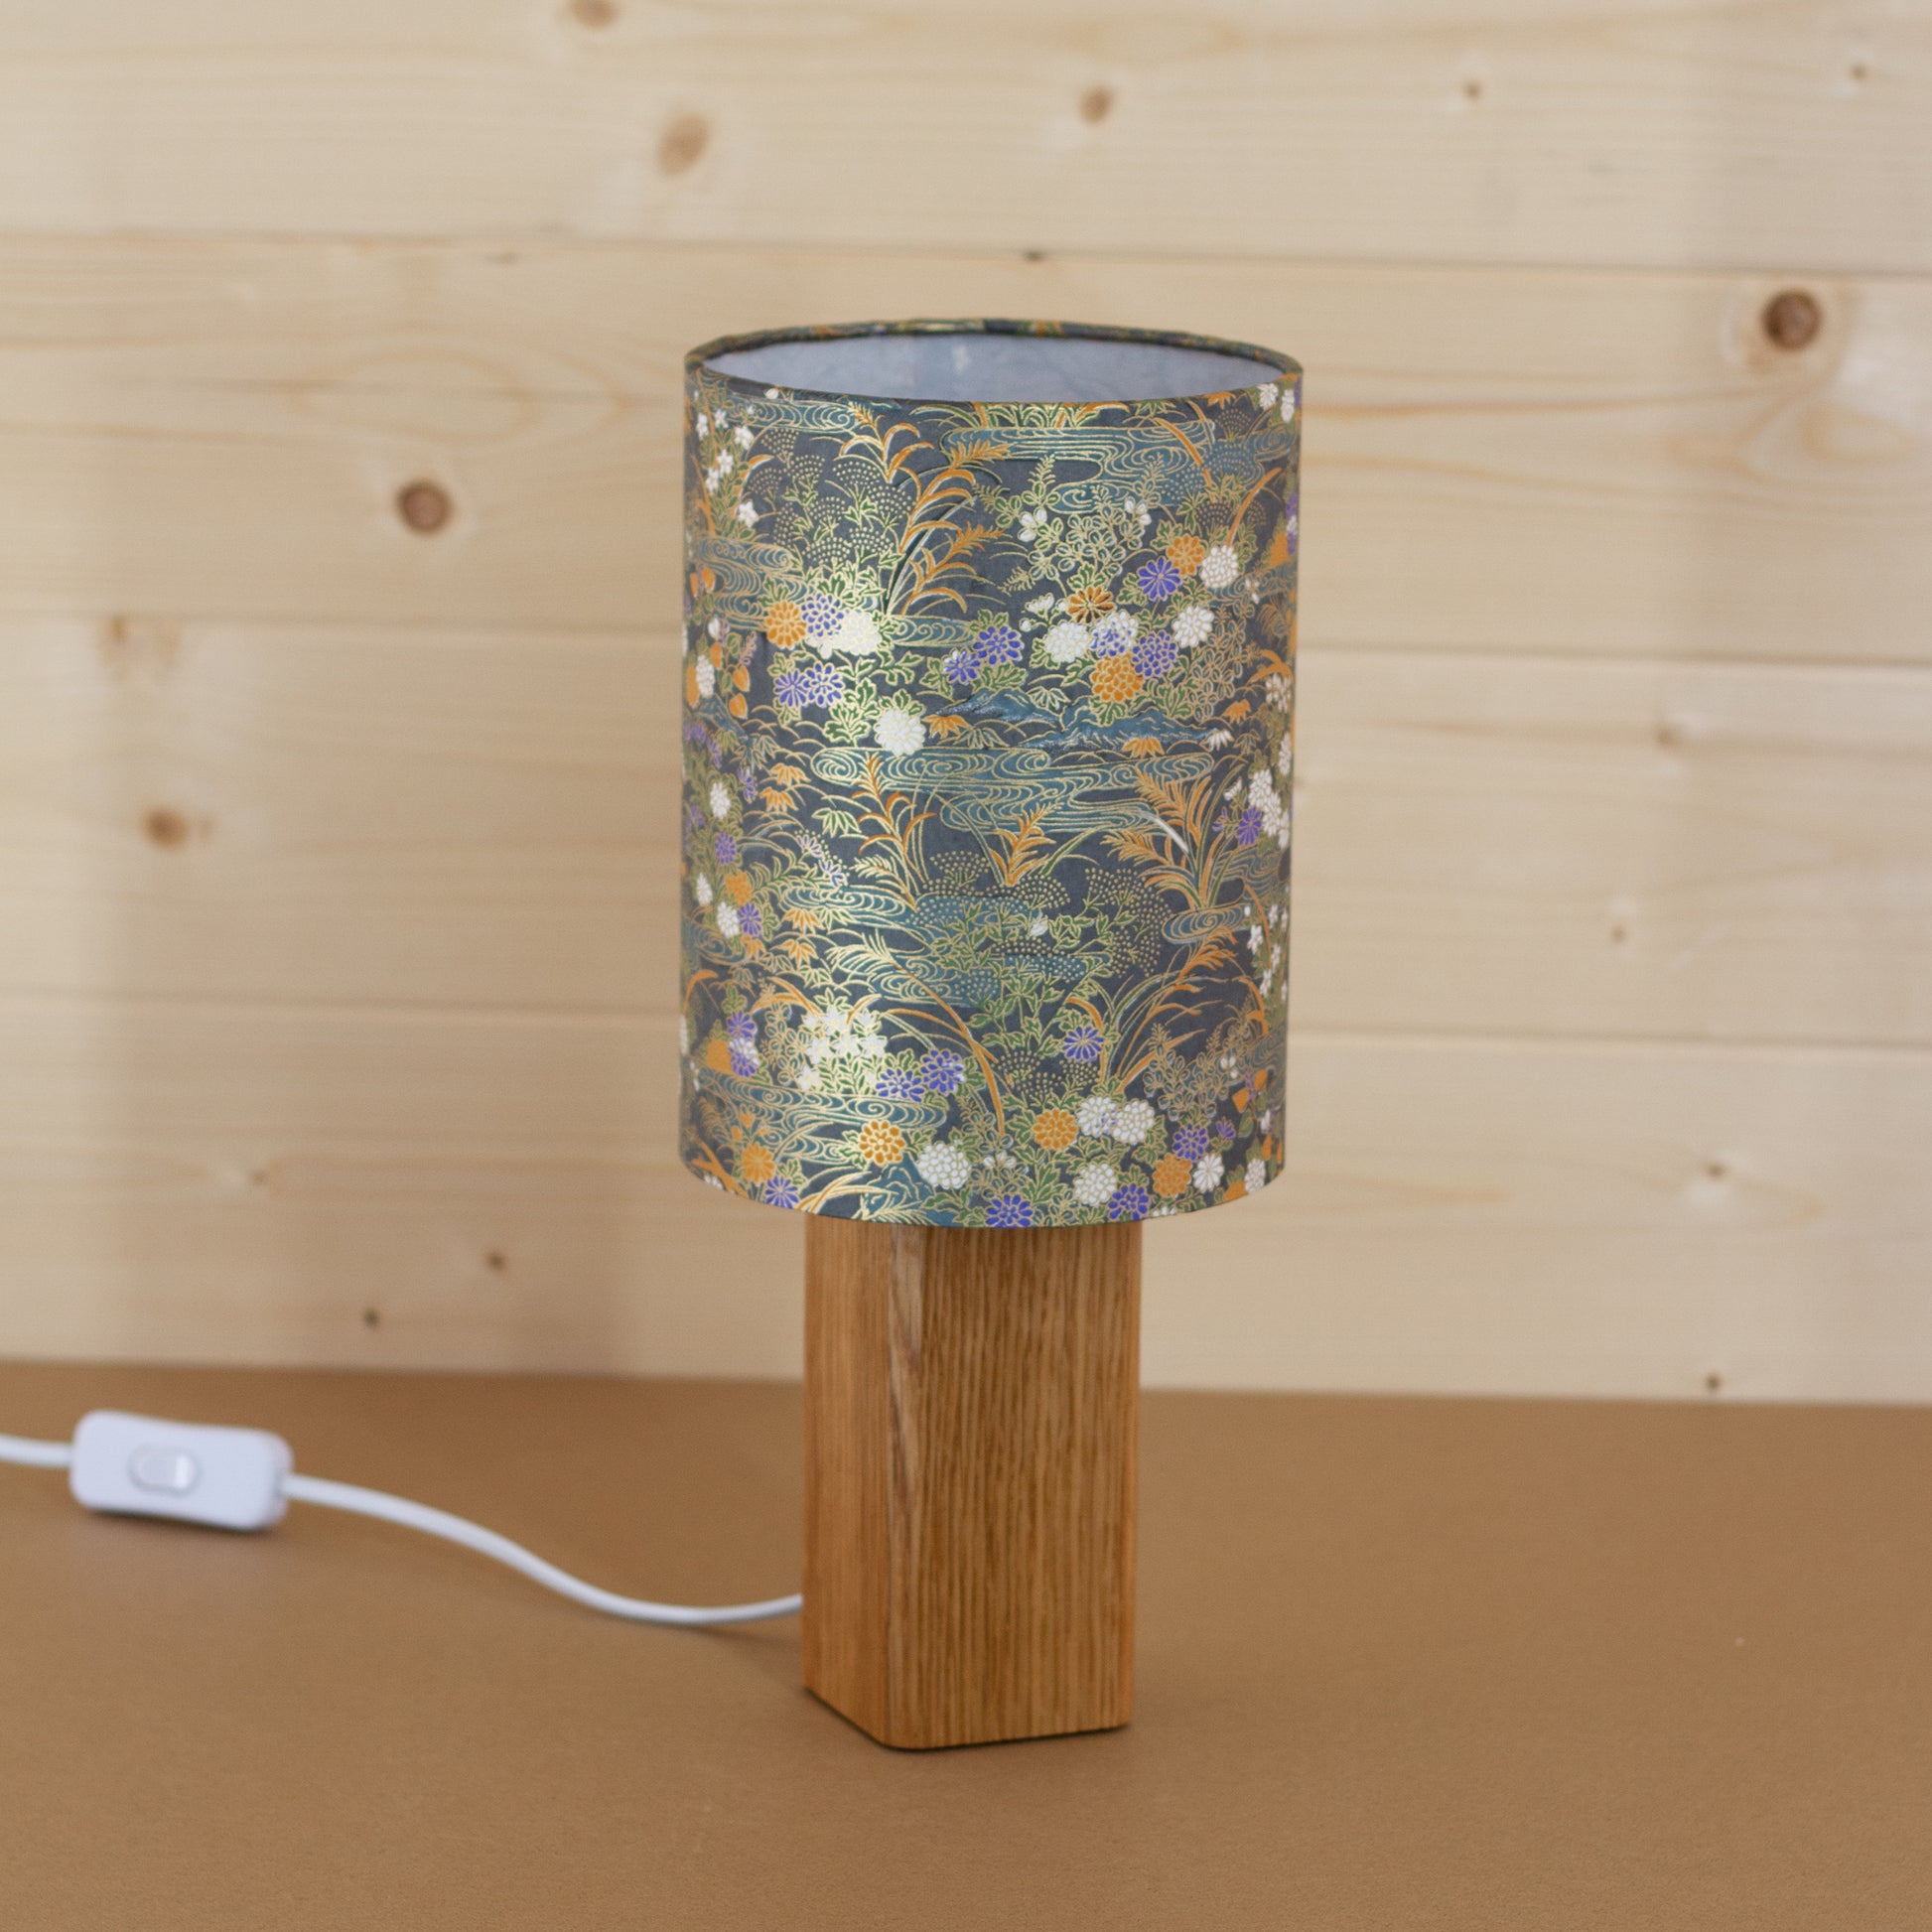 Lily Pond Yuzen Washi Oak Table Lamp, Handmade by Imbue Lighting on the Isle of Anglesey, Wales